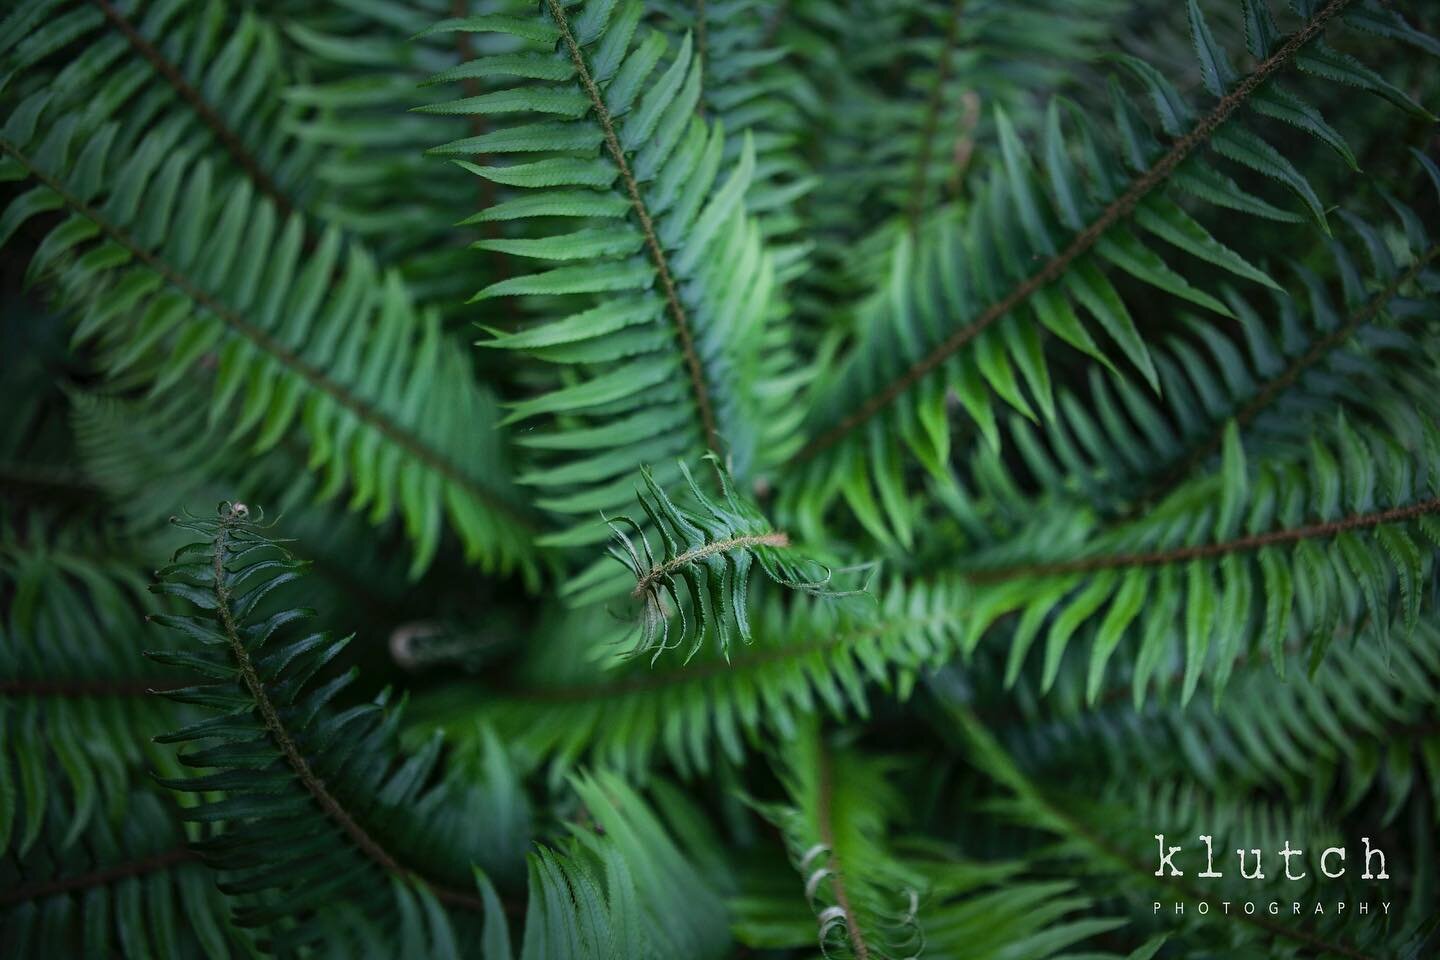 The fern symbolizes eternal youth. There, I&rsquo;ve educated someone this evening&hellip; including myself 😜

#naturephotography 
#beautyinnature 
#klutchphotography